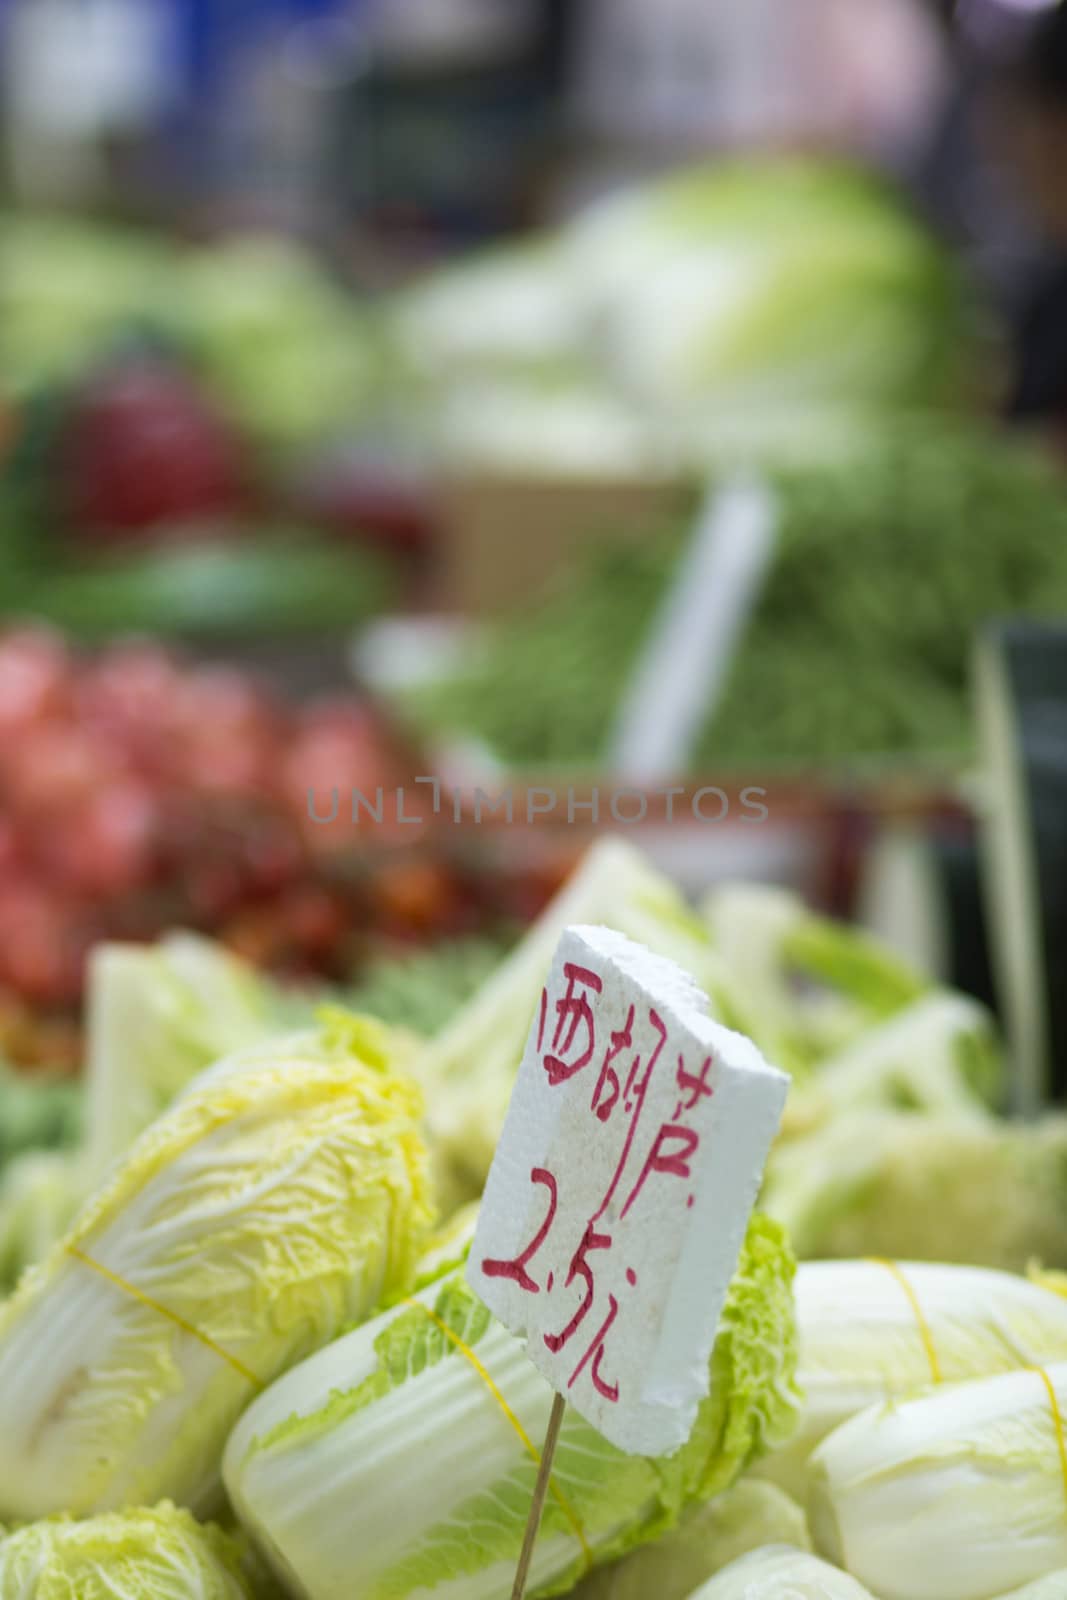 Fresh cabbage with price by watchtheworld